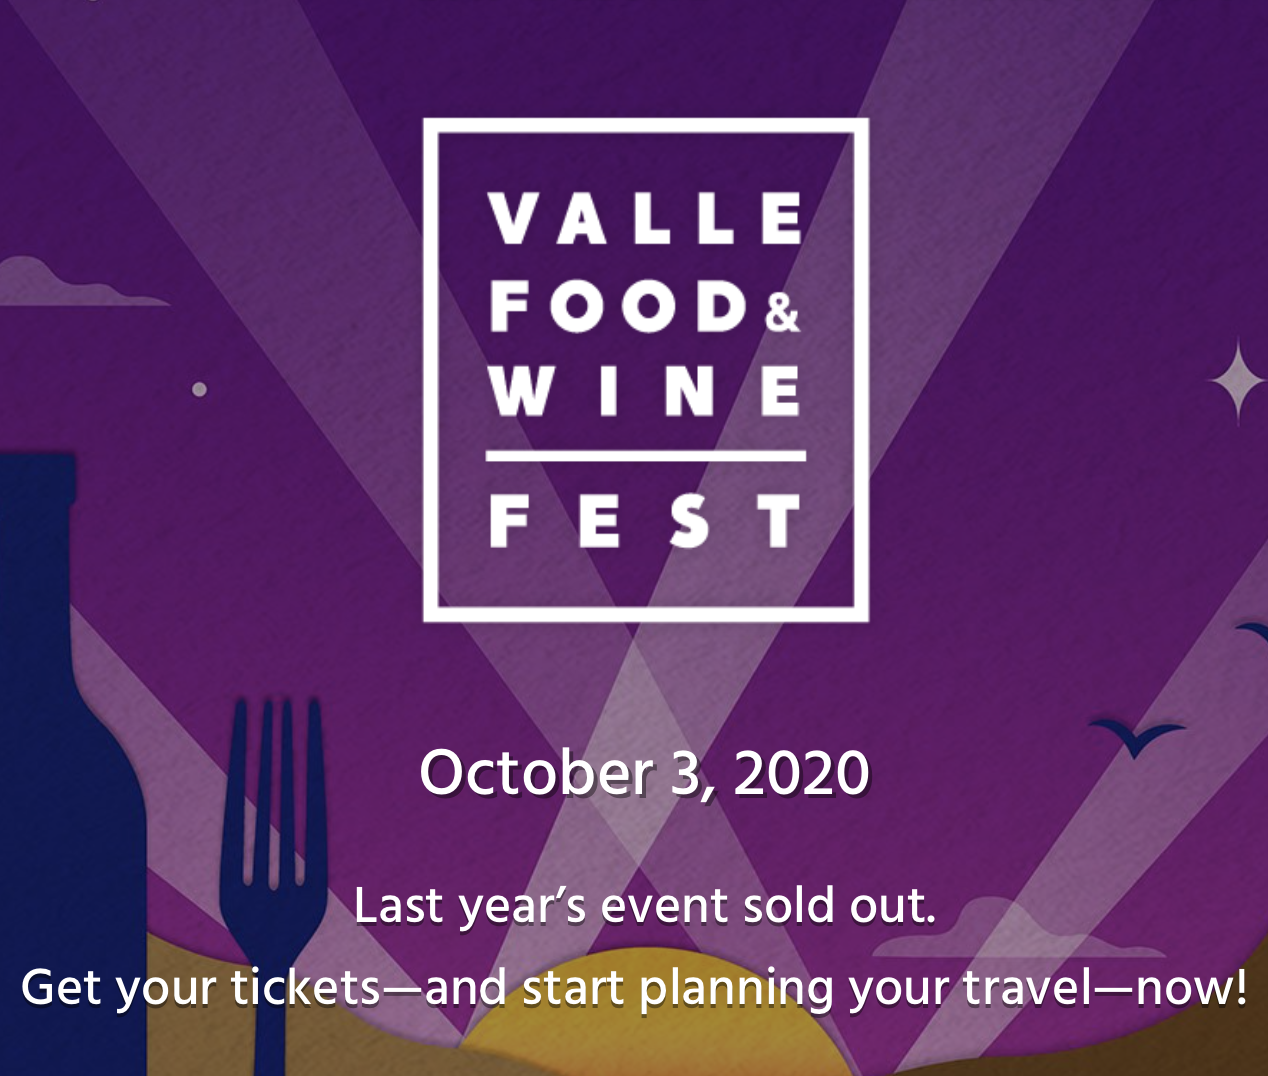 Promo code SDVILLE2020 saves 10% on passes to Valle Food & Wine Fest, taking place October 3!